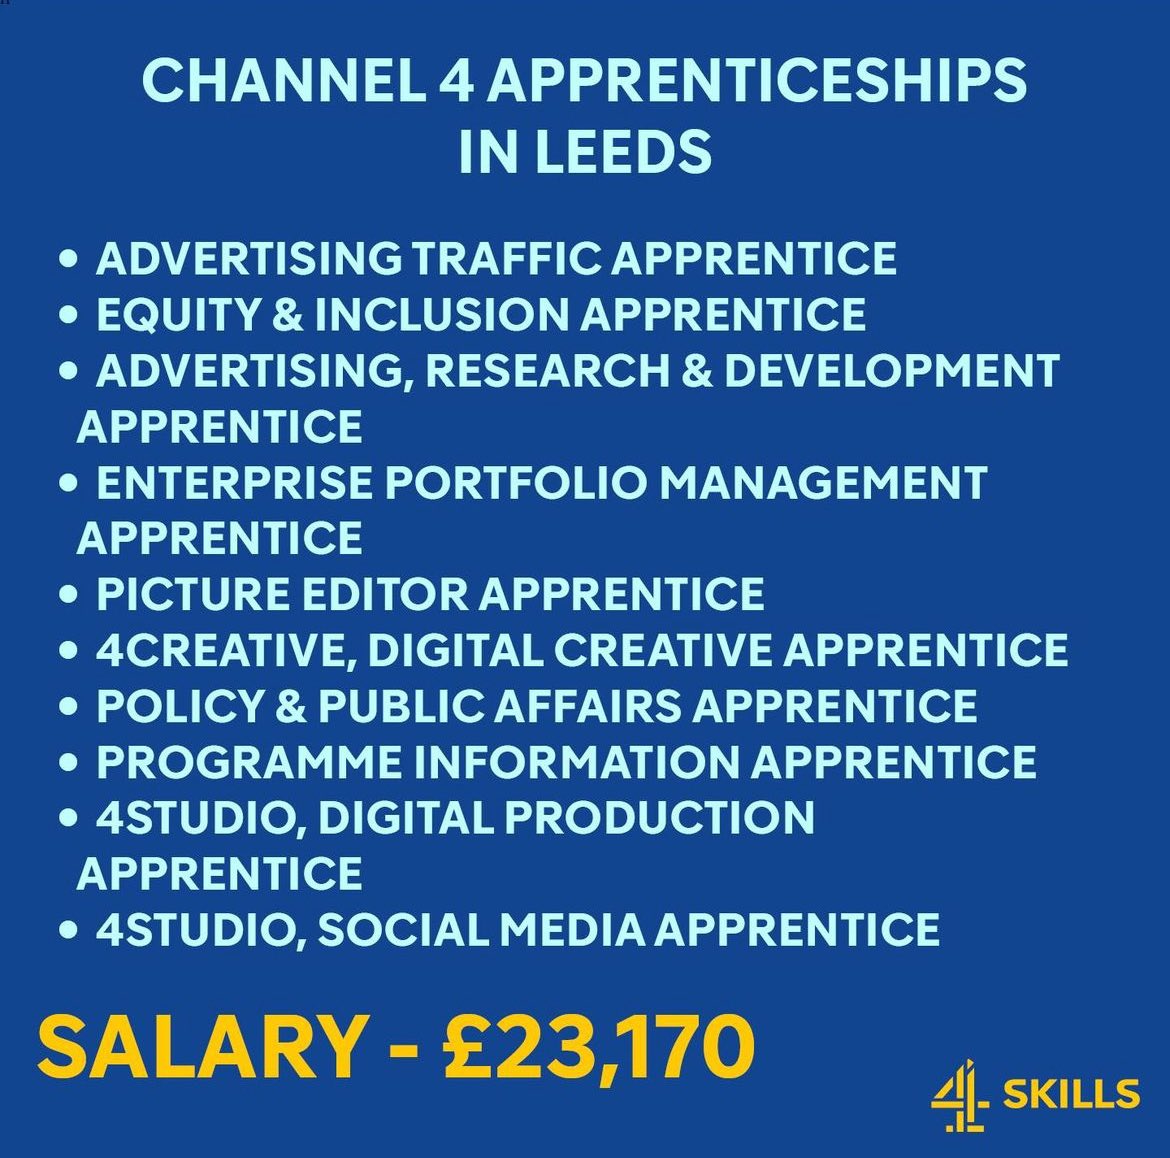 Apply by April 22nd via @Channel4Skills. Opportunities across the country. #tvjobs #lovingyourwork Follow for more tv jobs.